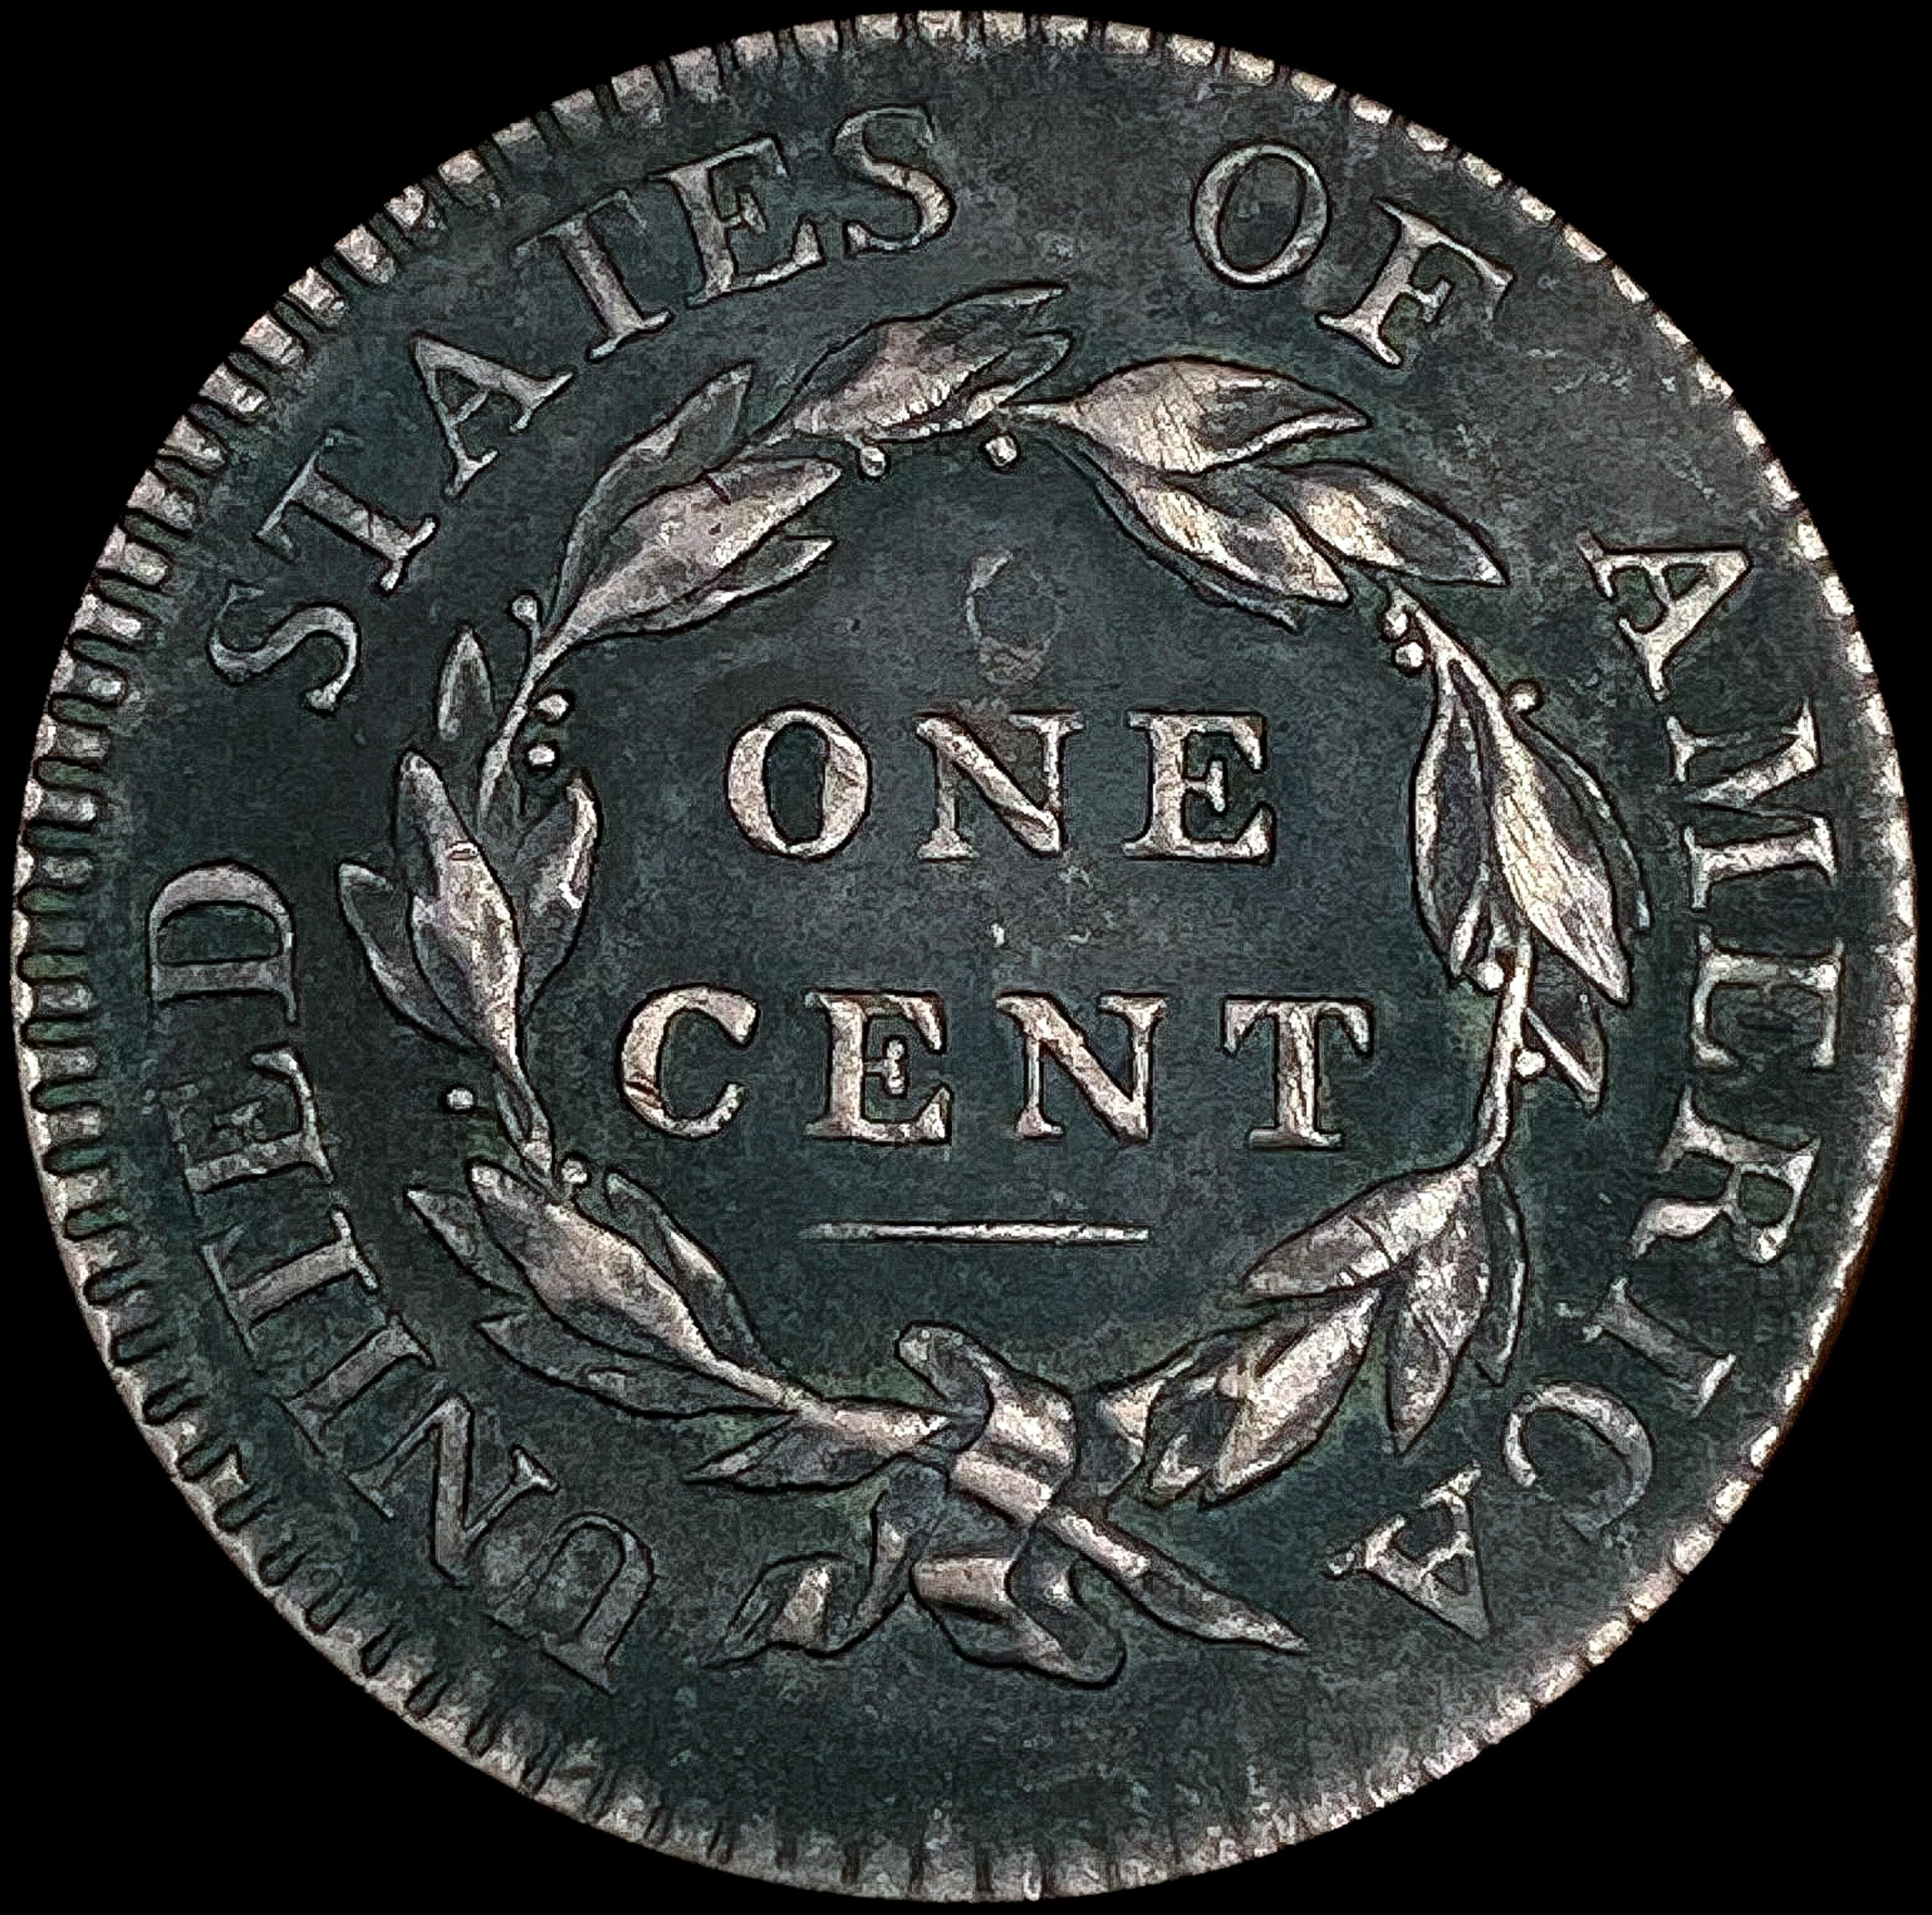 1817 Coronet Head Large Cent LIGHTLY CIRCULATED